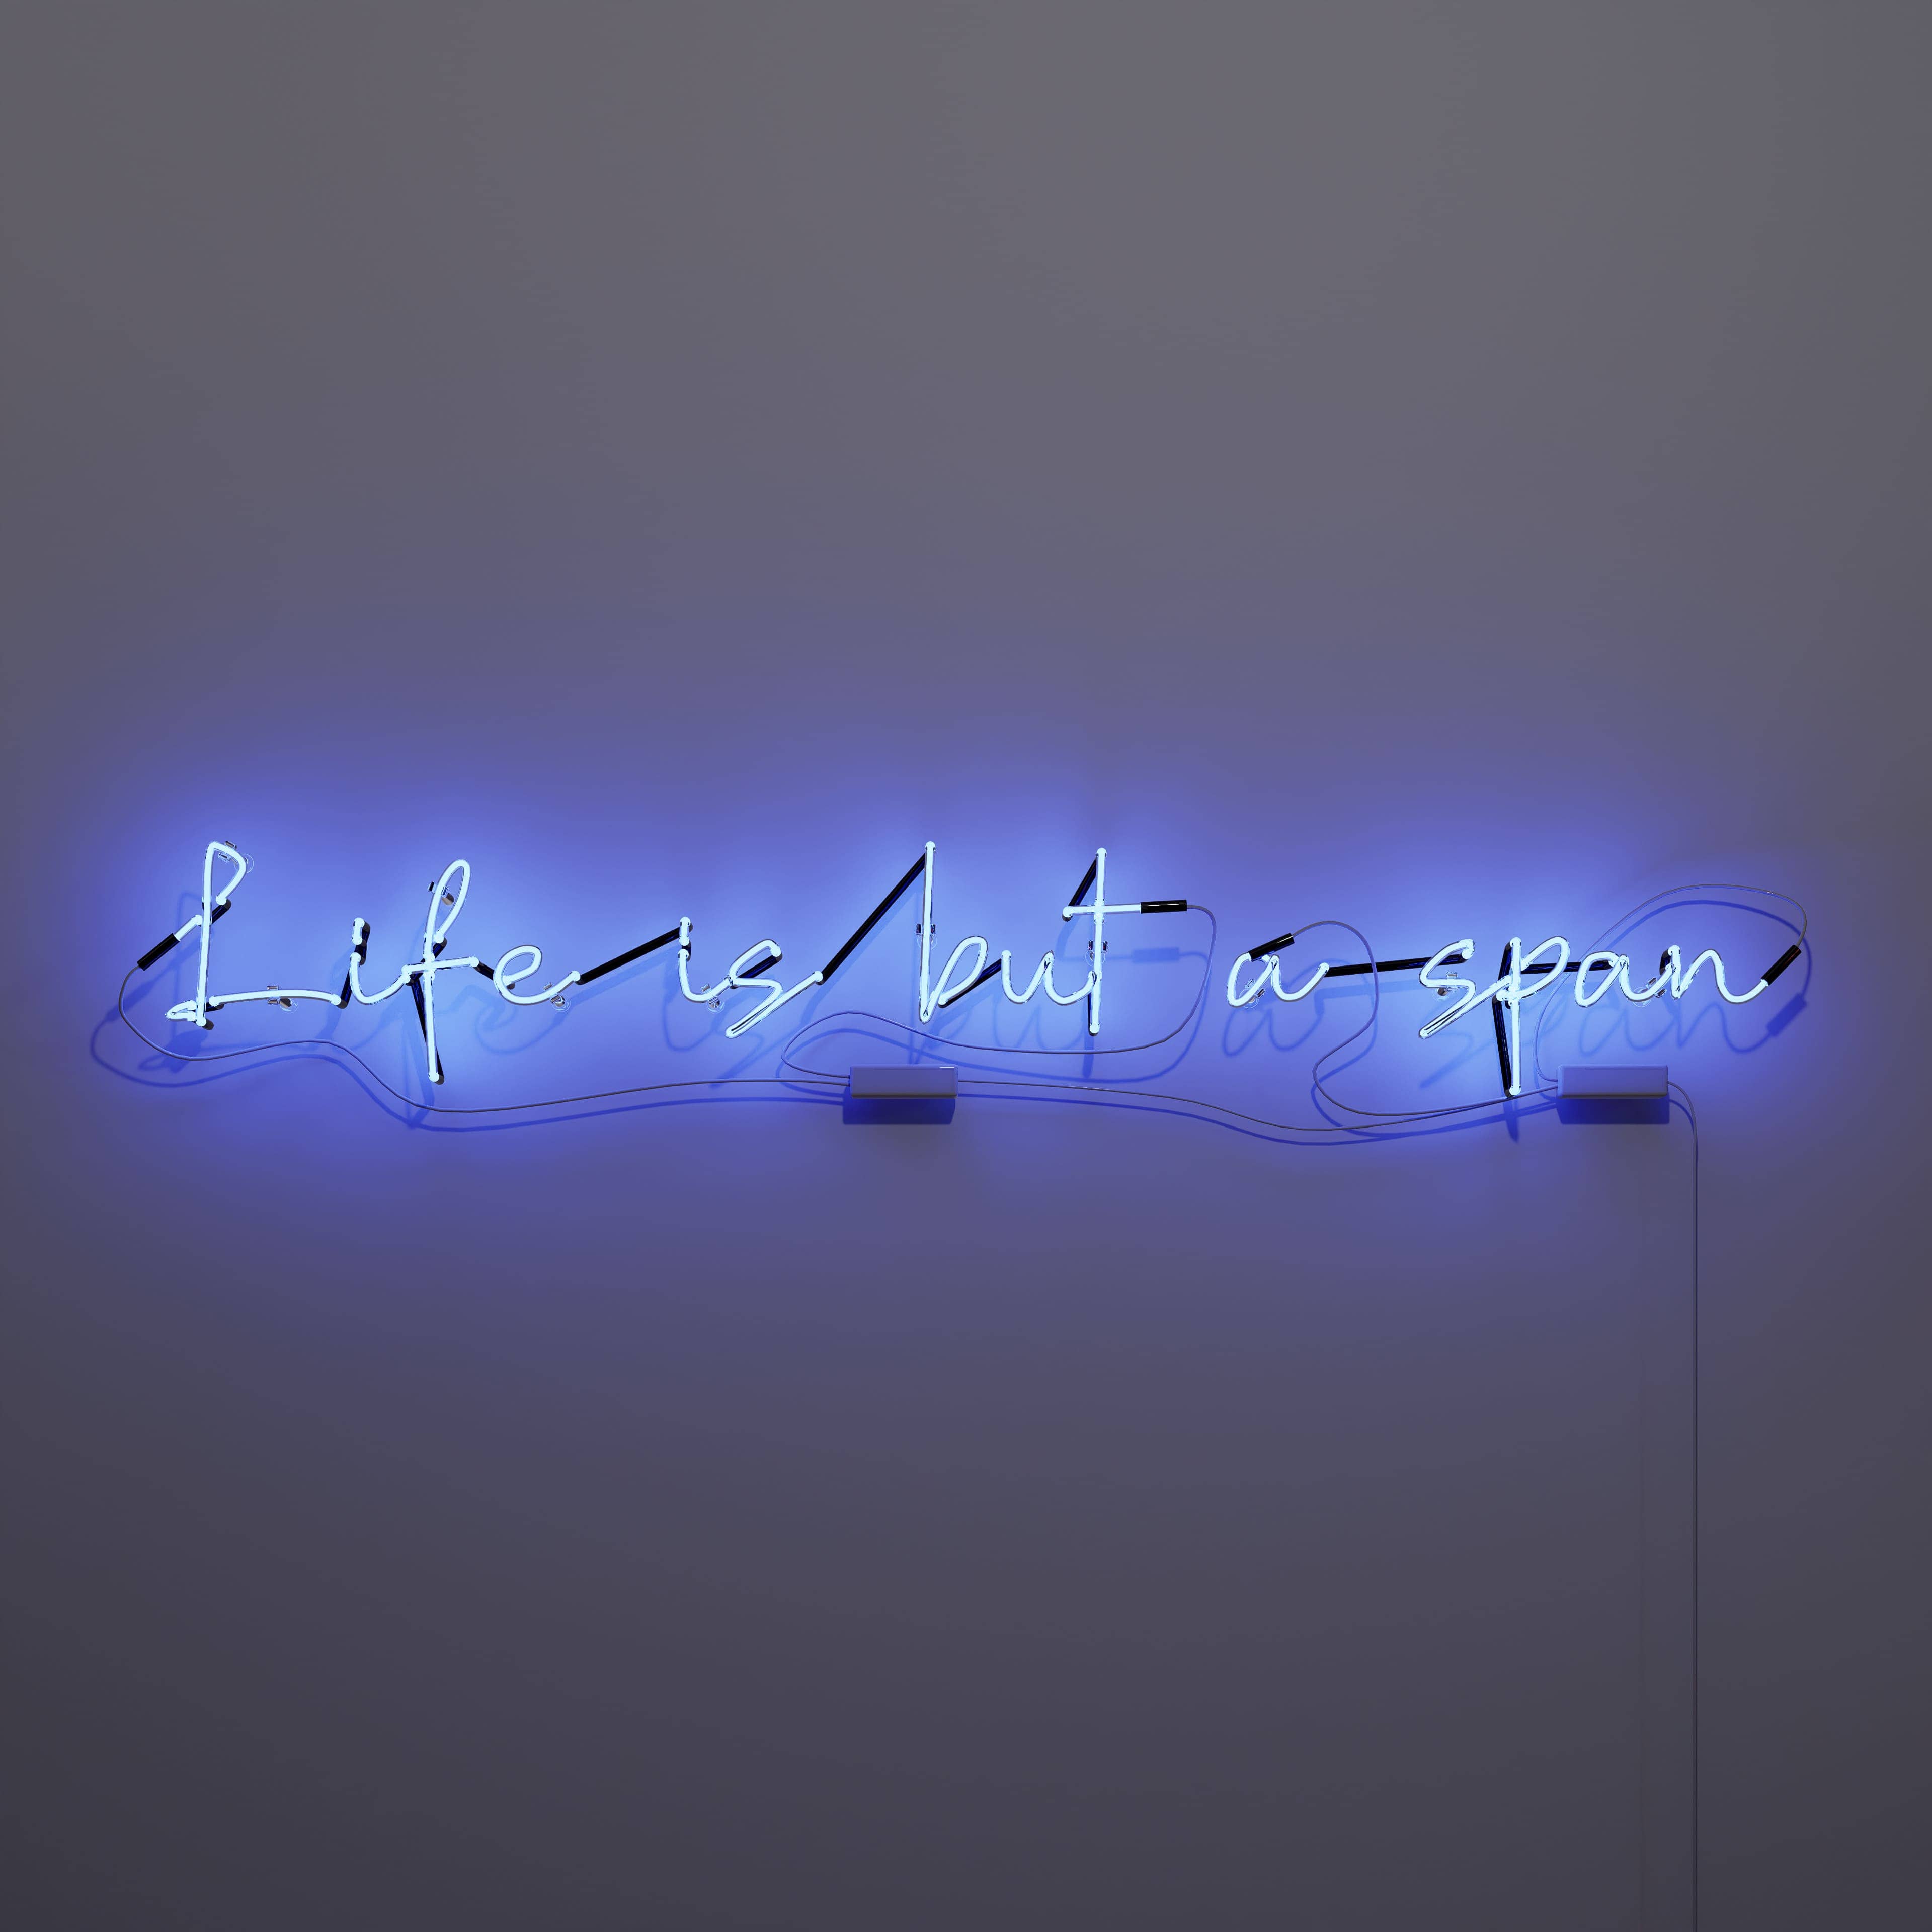 vintage-neon-signs-echo-the-passage-of-time